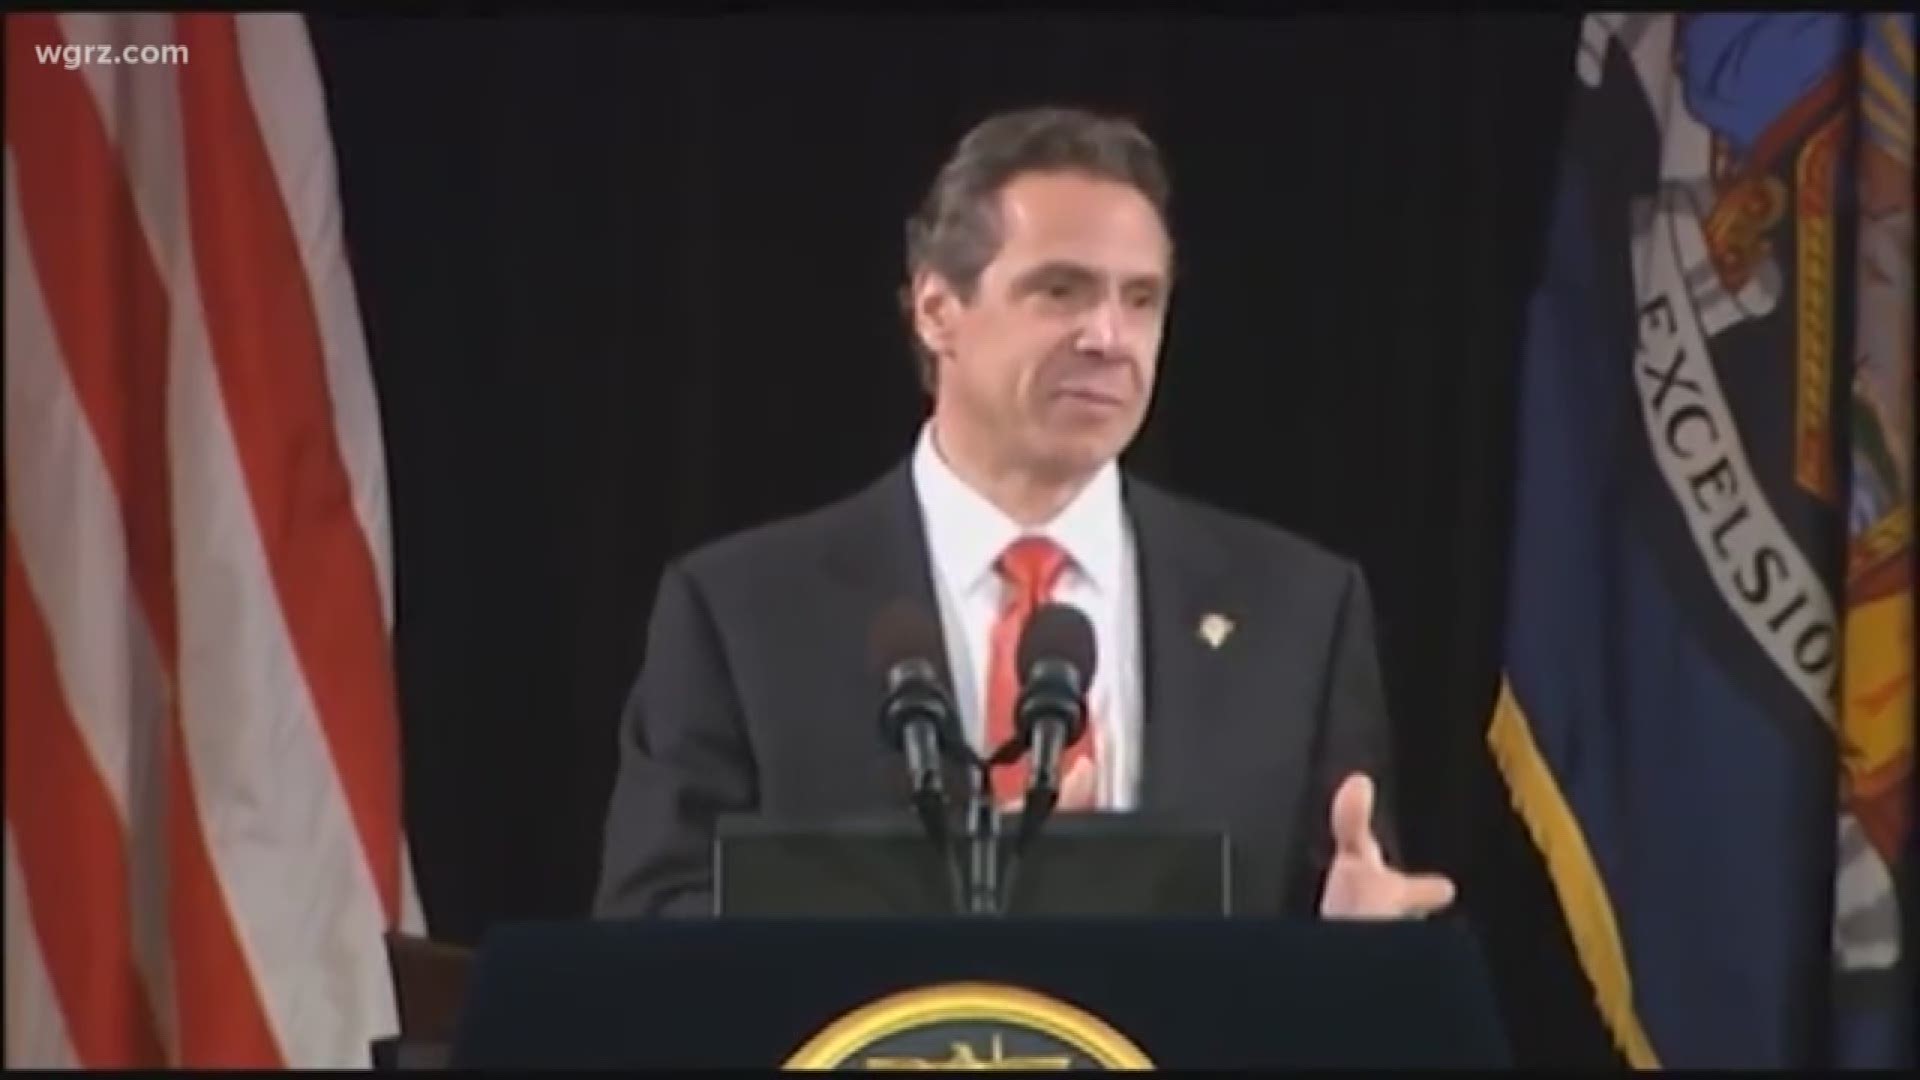 Governor Cuomo defending himself after a joke he made yesterday.